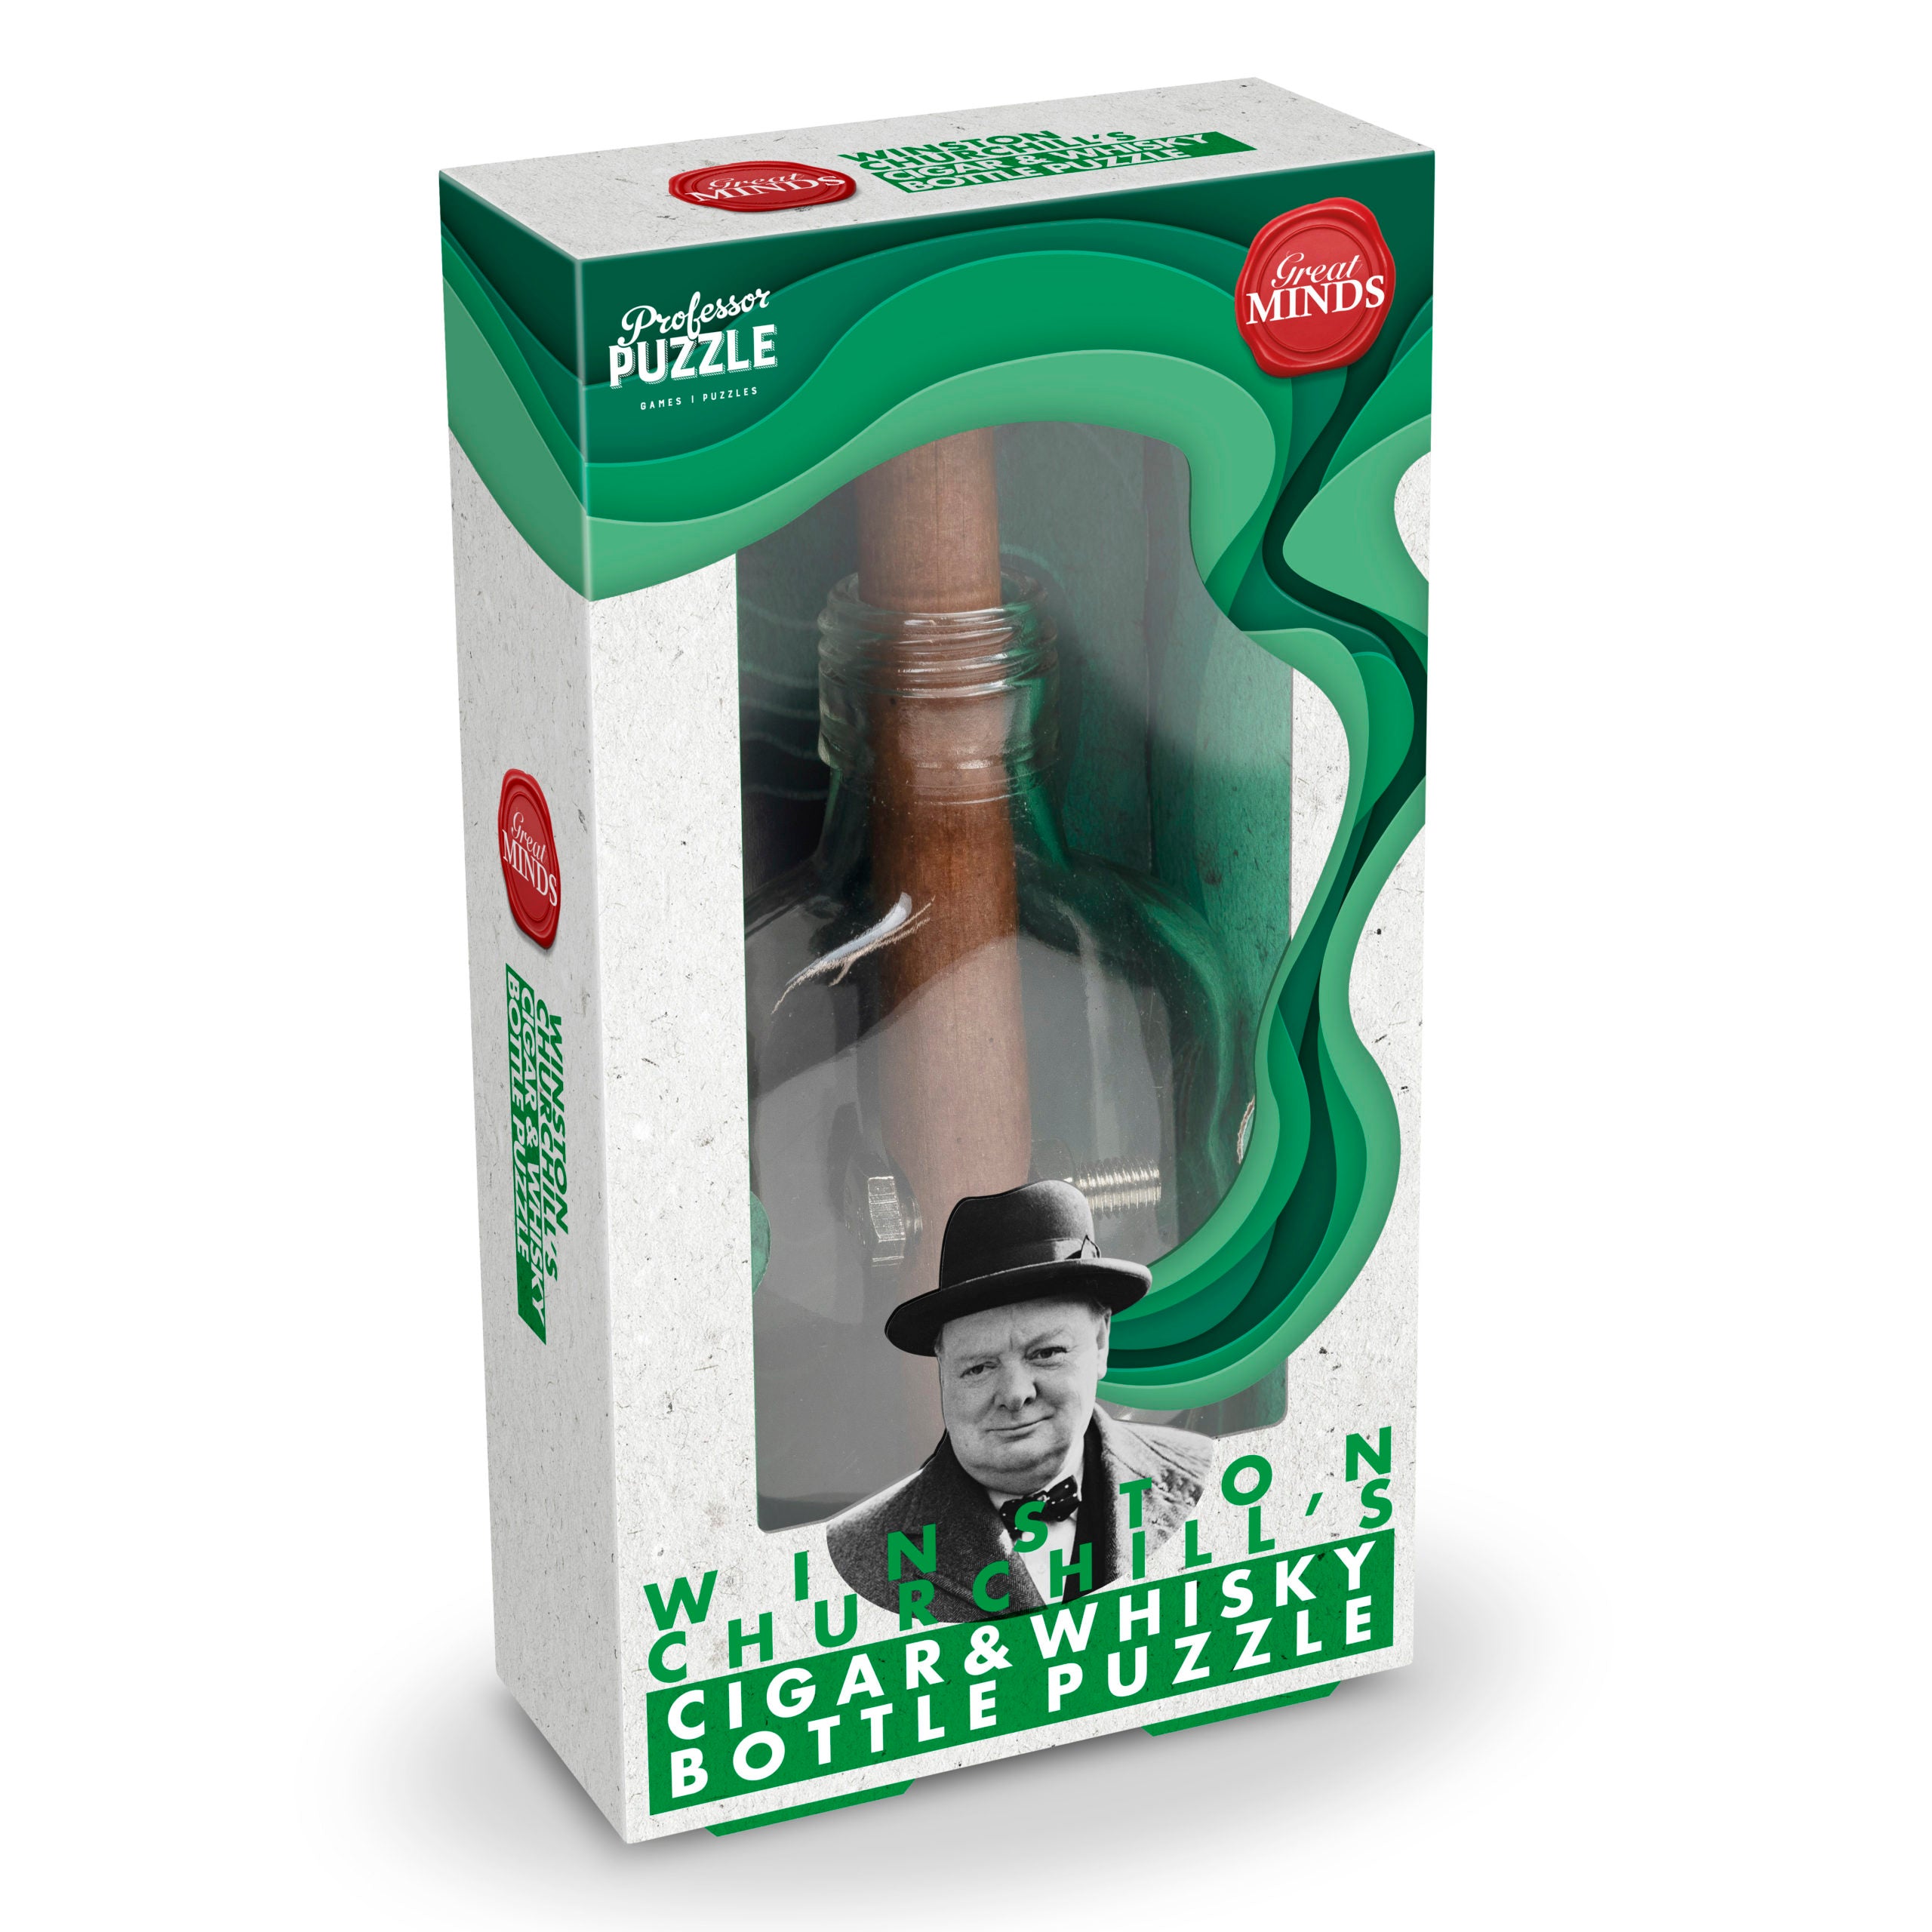 Great Minds Churchill’s Cigar and Whisky Bottle Puzzle US